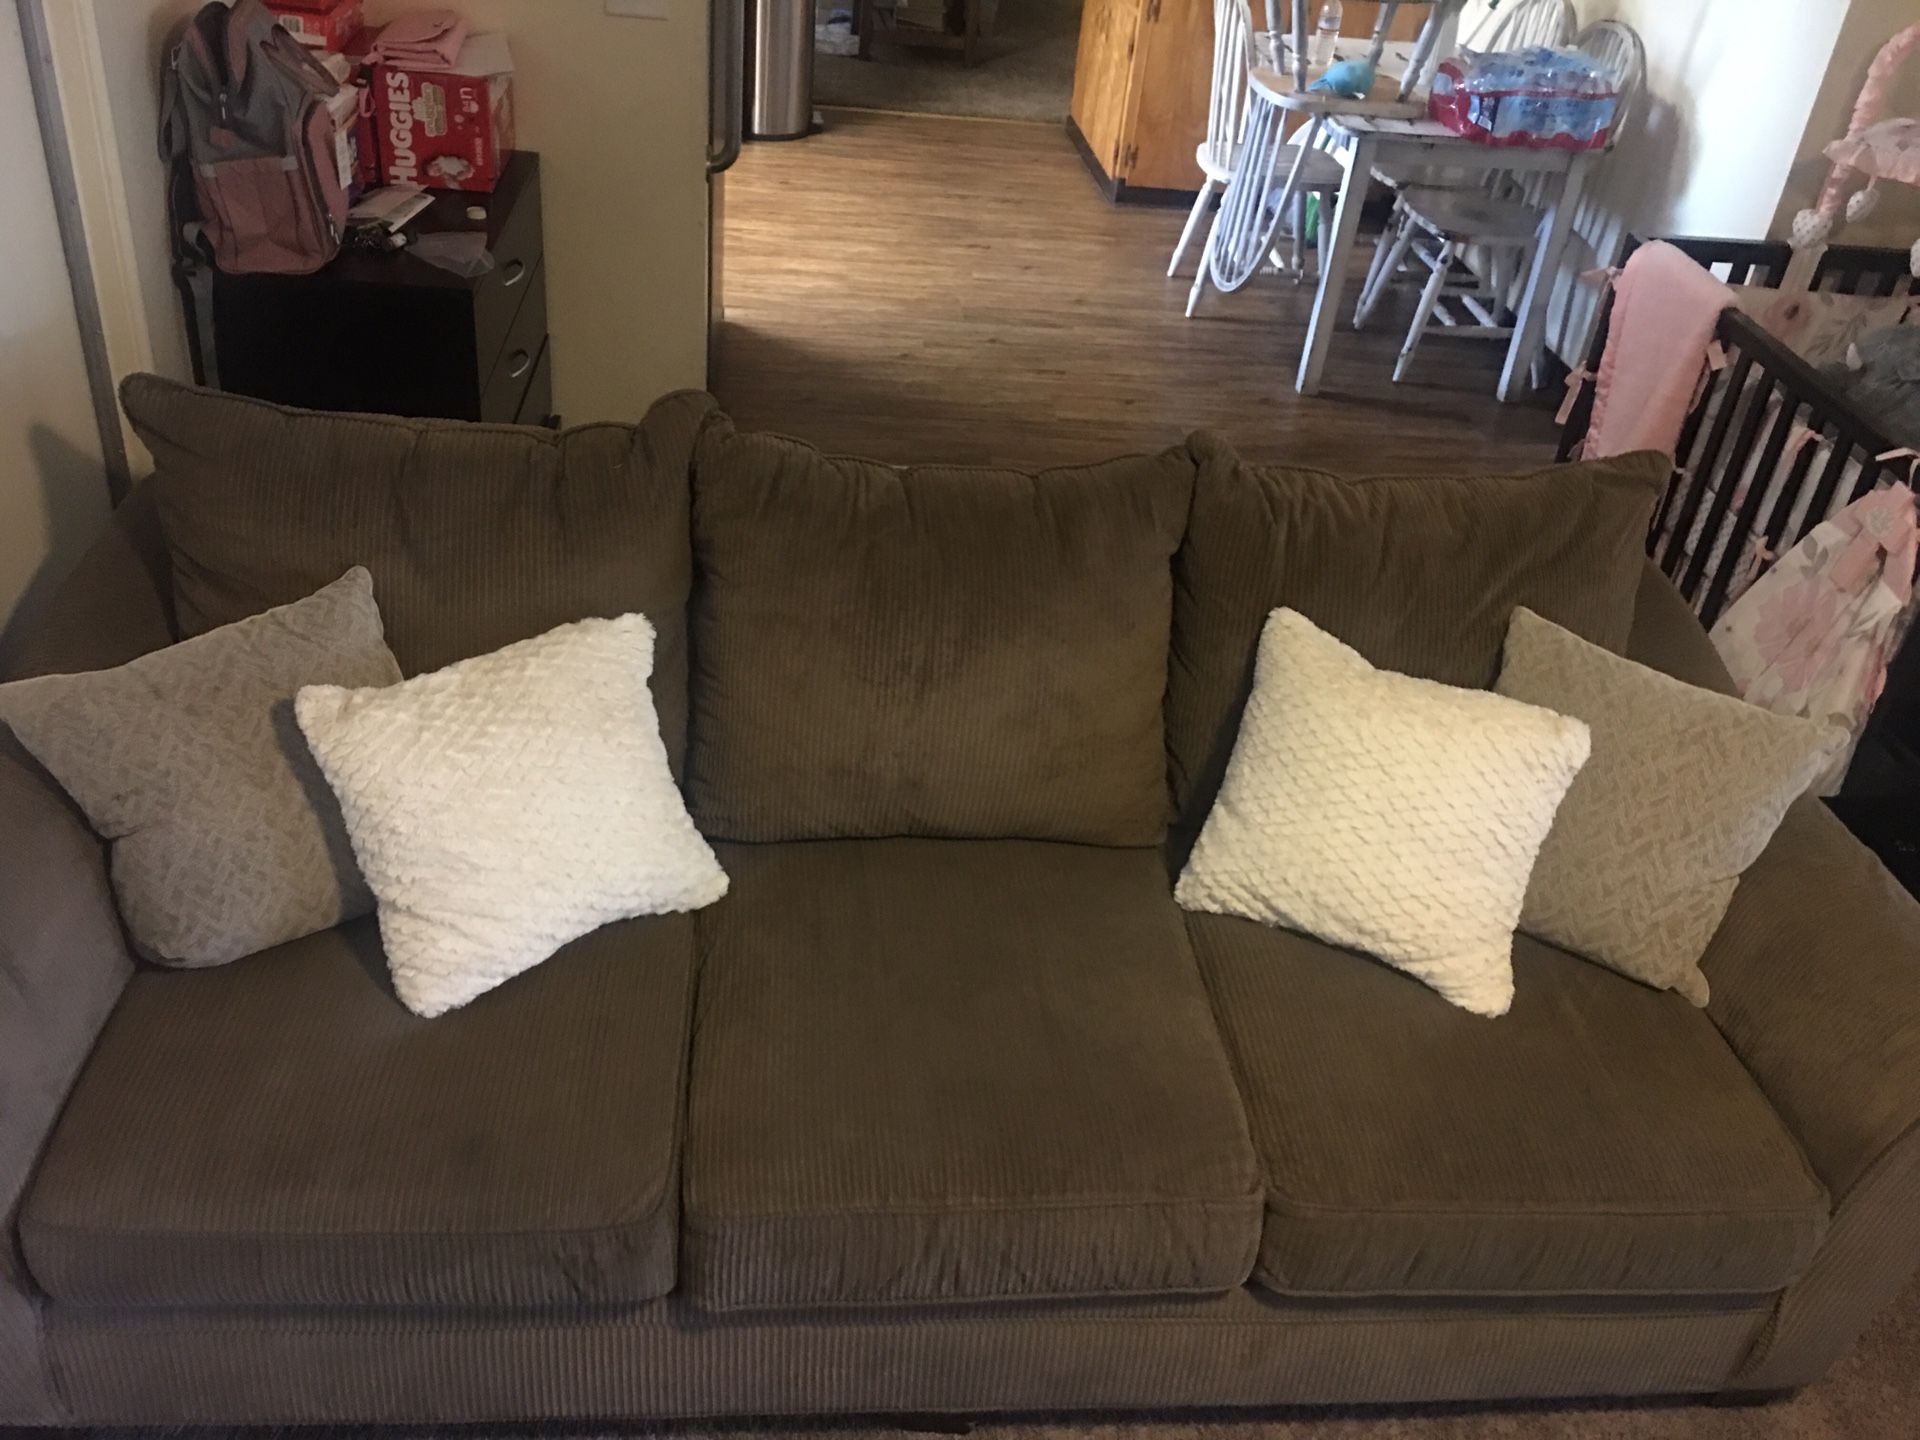 3 couches ( over size couch , love seat , and chair)